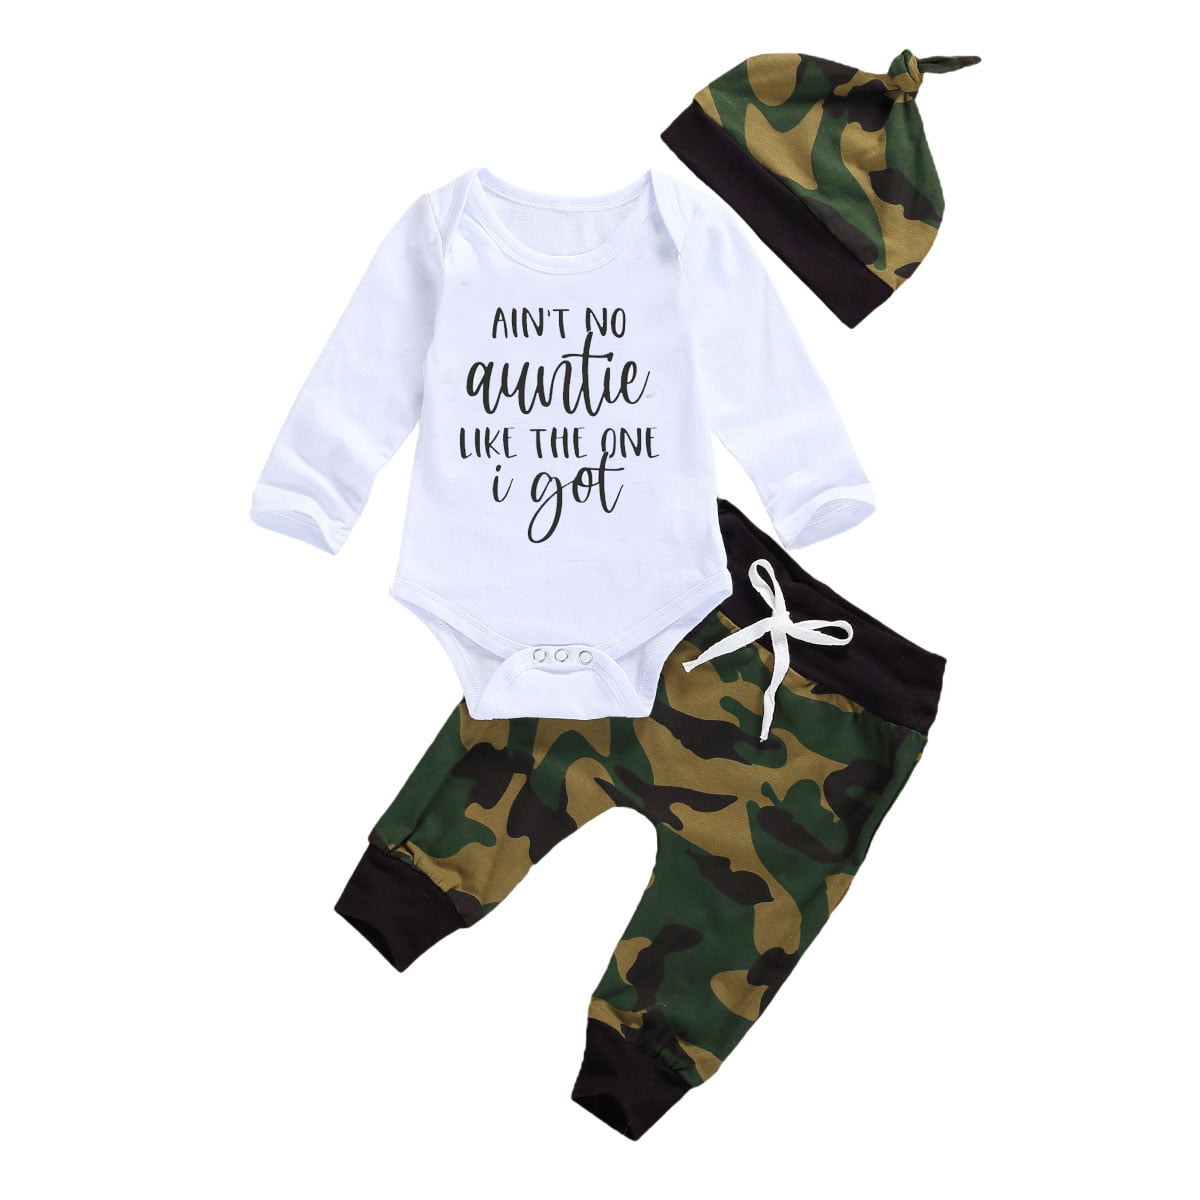 Newborn Baby Boy Clothes Outfit New to The Crew Letter Print Romper Camouflage Pants Hat 3PCS Set 